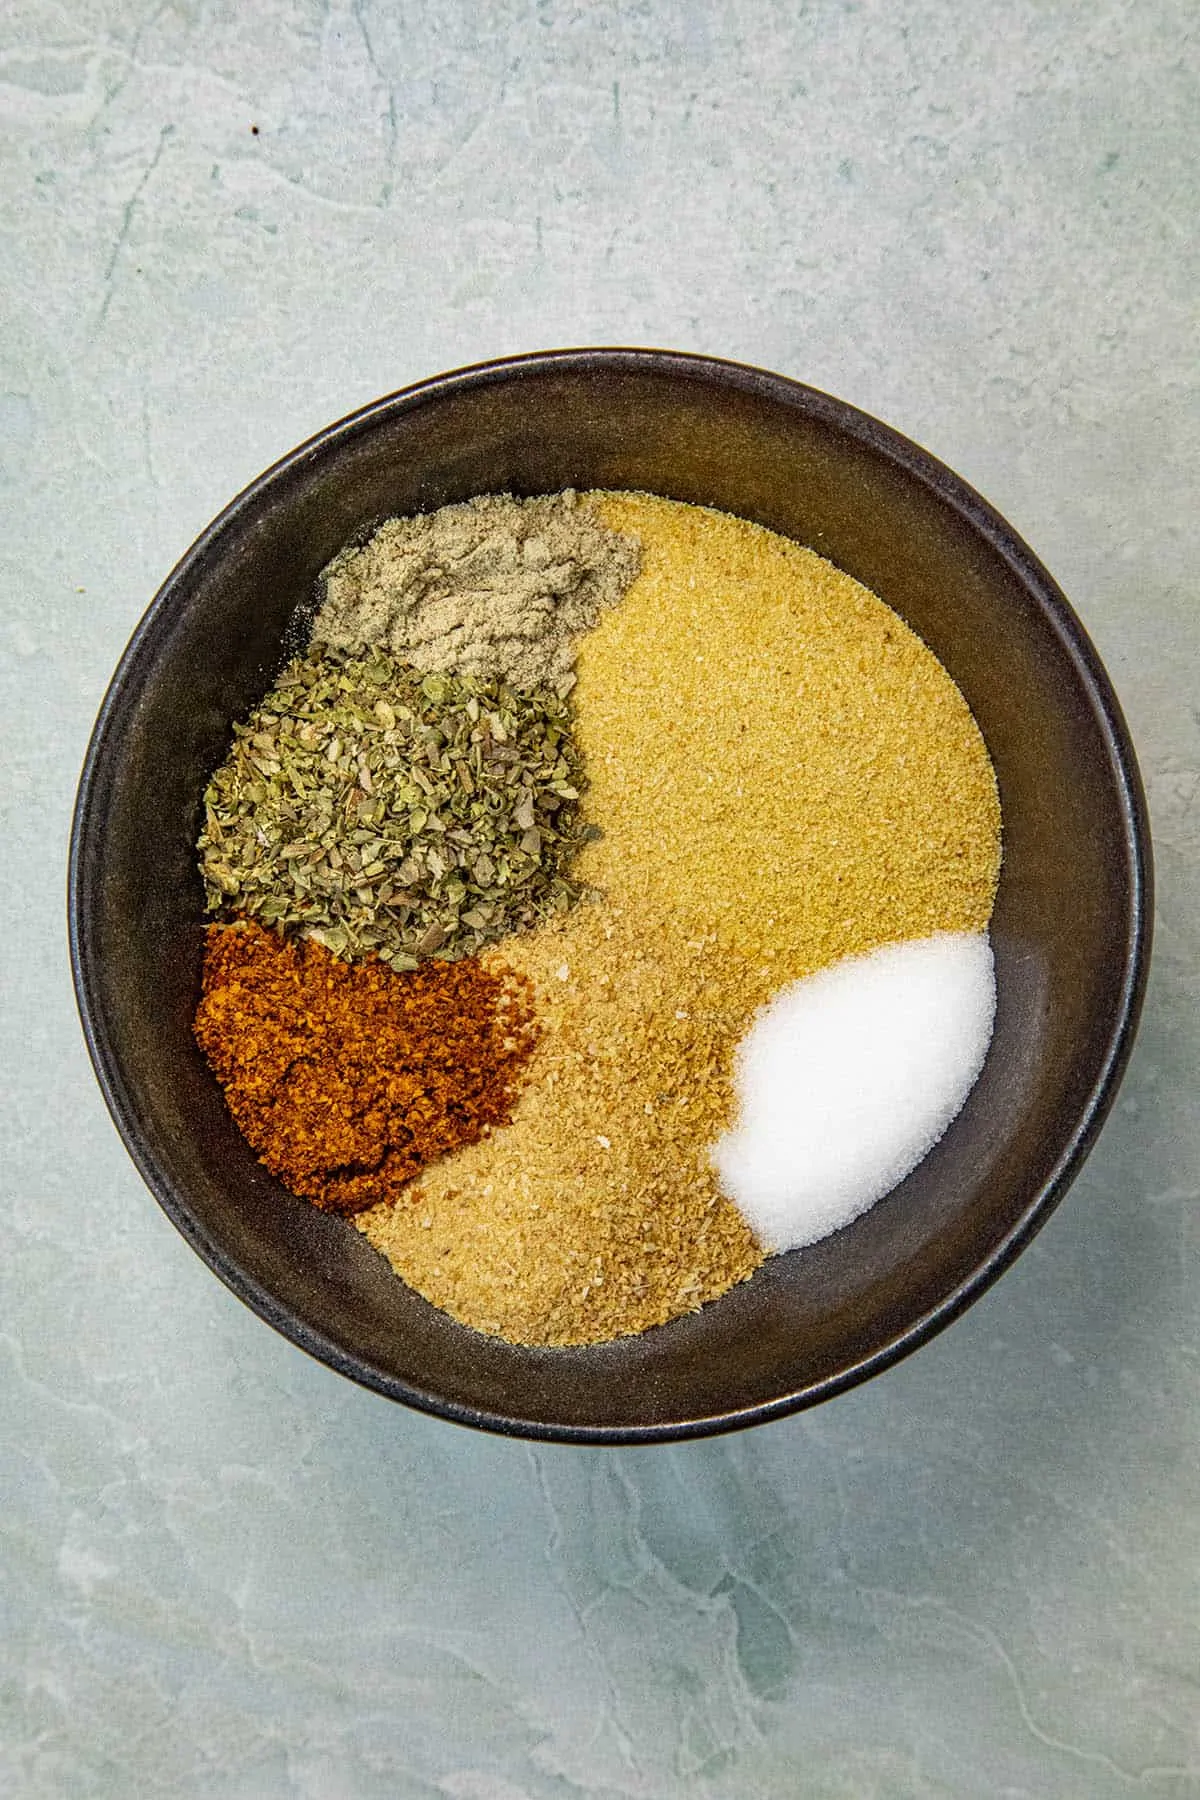 Adobo Seasoning ingredients in a bowl, ready to mix